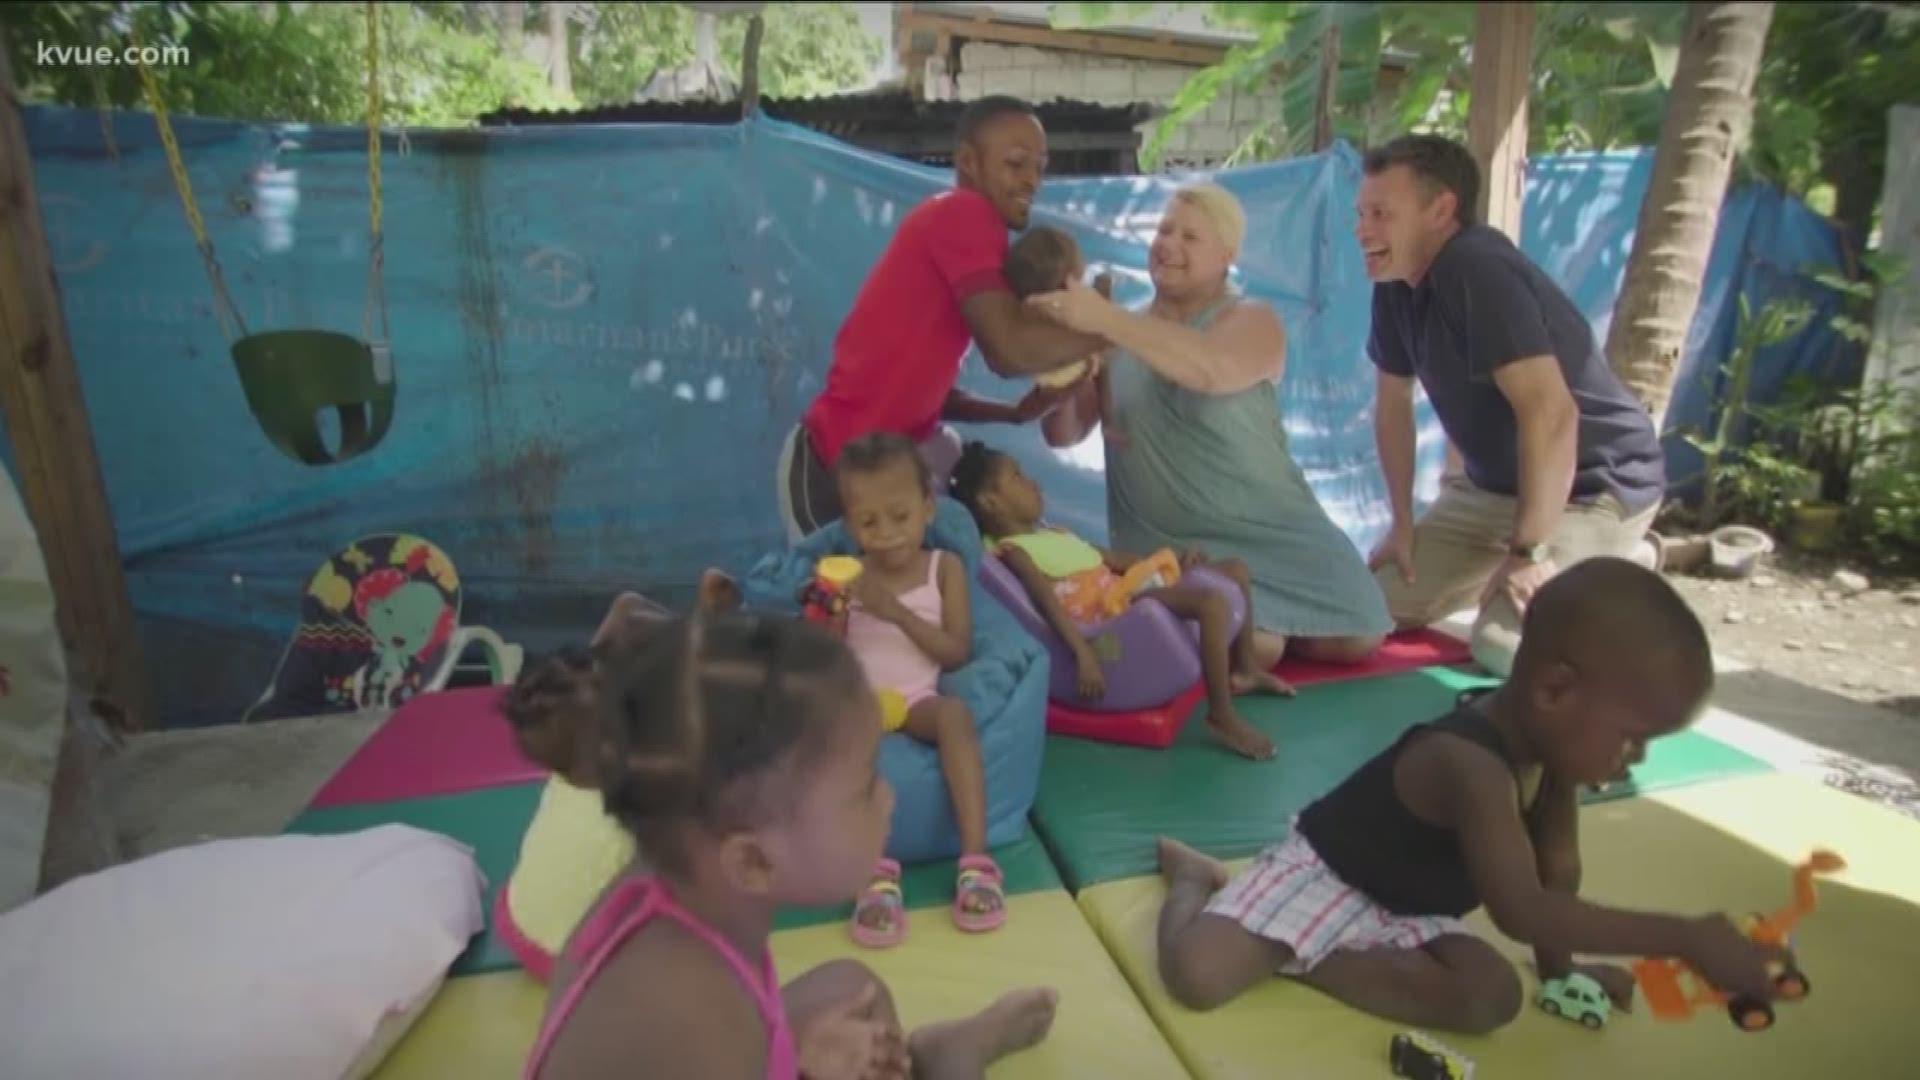 UT’s Dell Medical School and faith-based organization ‘My Life Speaks’ are teaming up to address a health crisis in Haiti. Dr. Coburn Allen, who is the associate professor at the Department of Pediatrics, and Sue Allen, the executive director of U.S. Operations for My Life Speaks, talked to KVUE about the event.